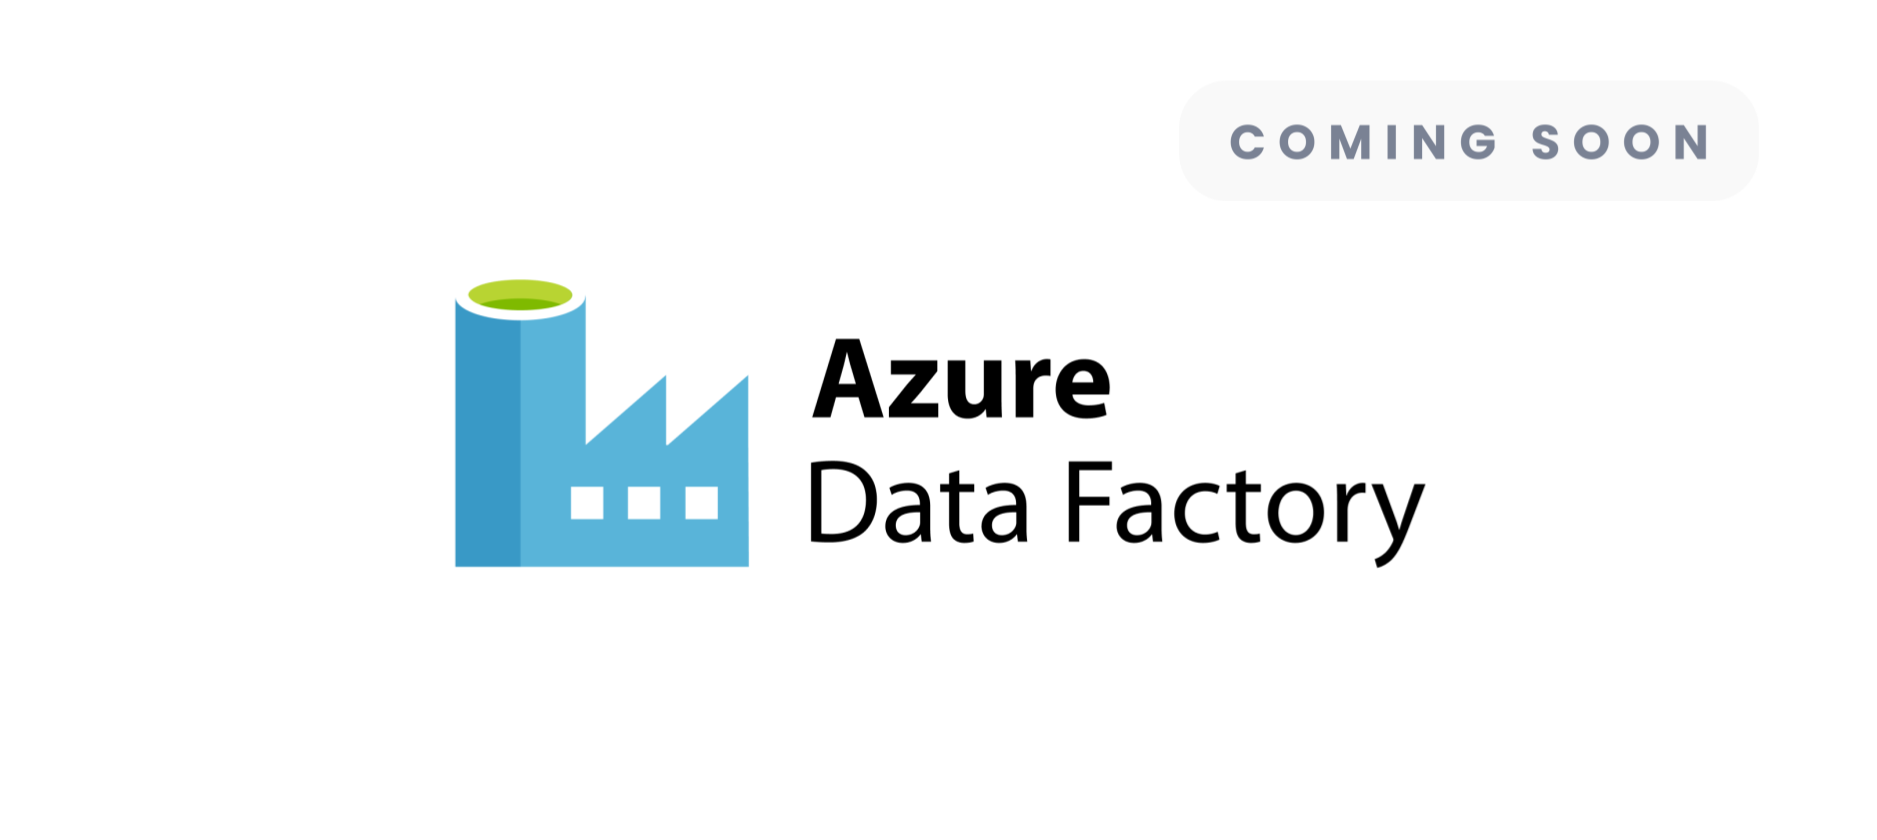 Azure Data Factory - Coming soon